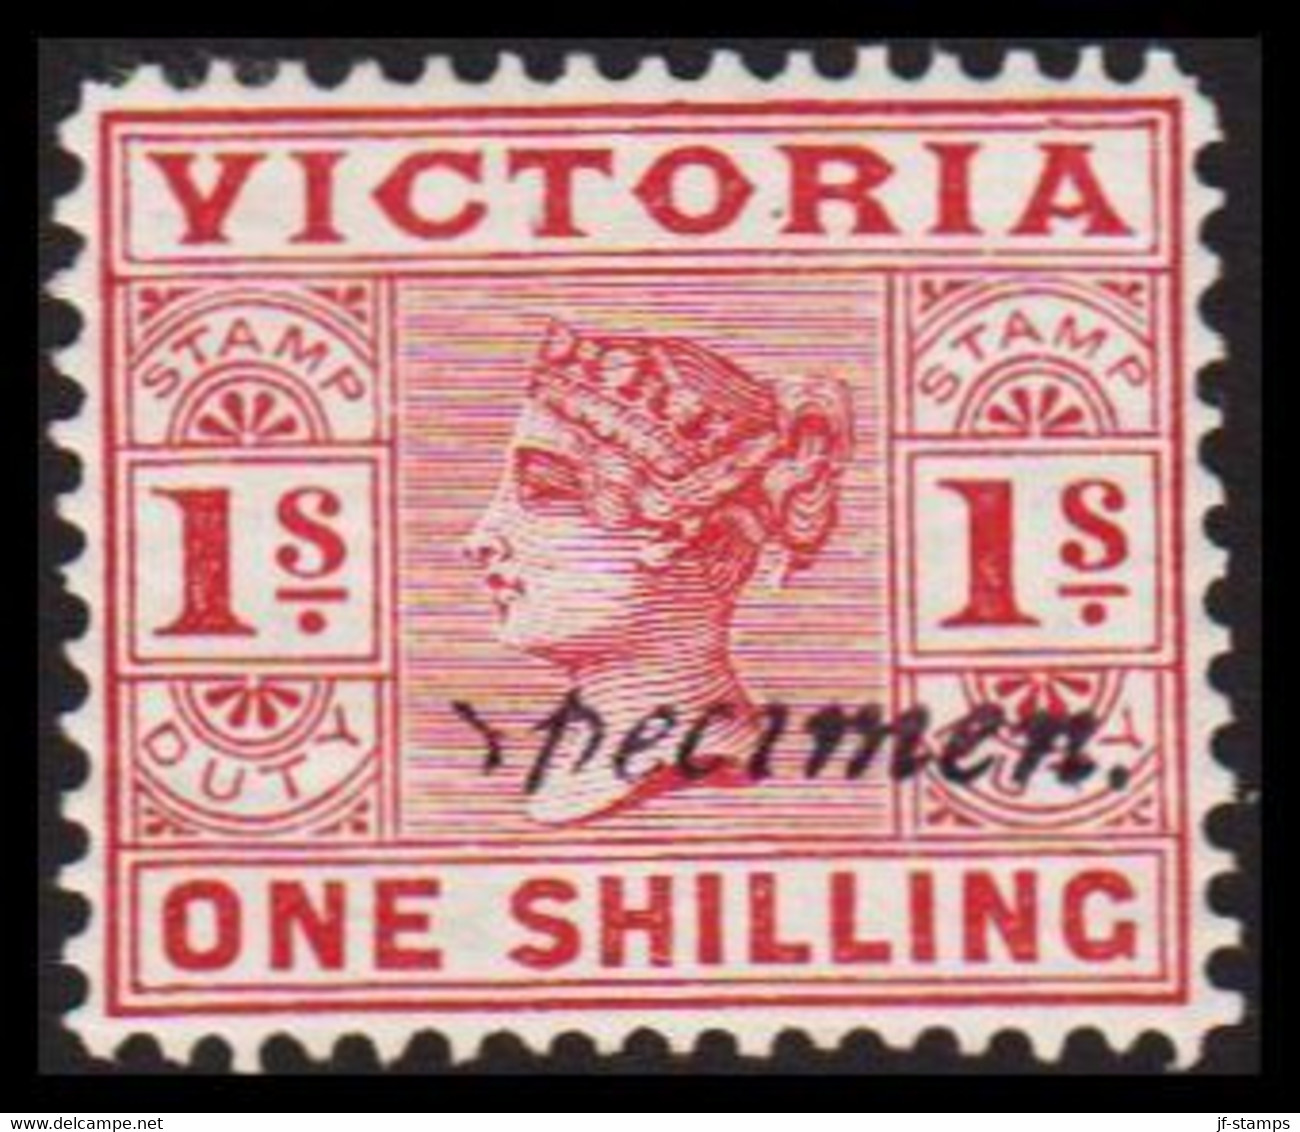 1886. VICTORIA AUSTRALIA  ONE SHILLING Victoria. Overprinted Specimen. Hinged. Beautiful Stamp.  - JF530101 - Mint Stamps